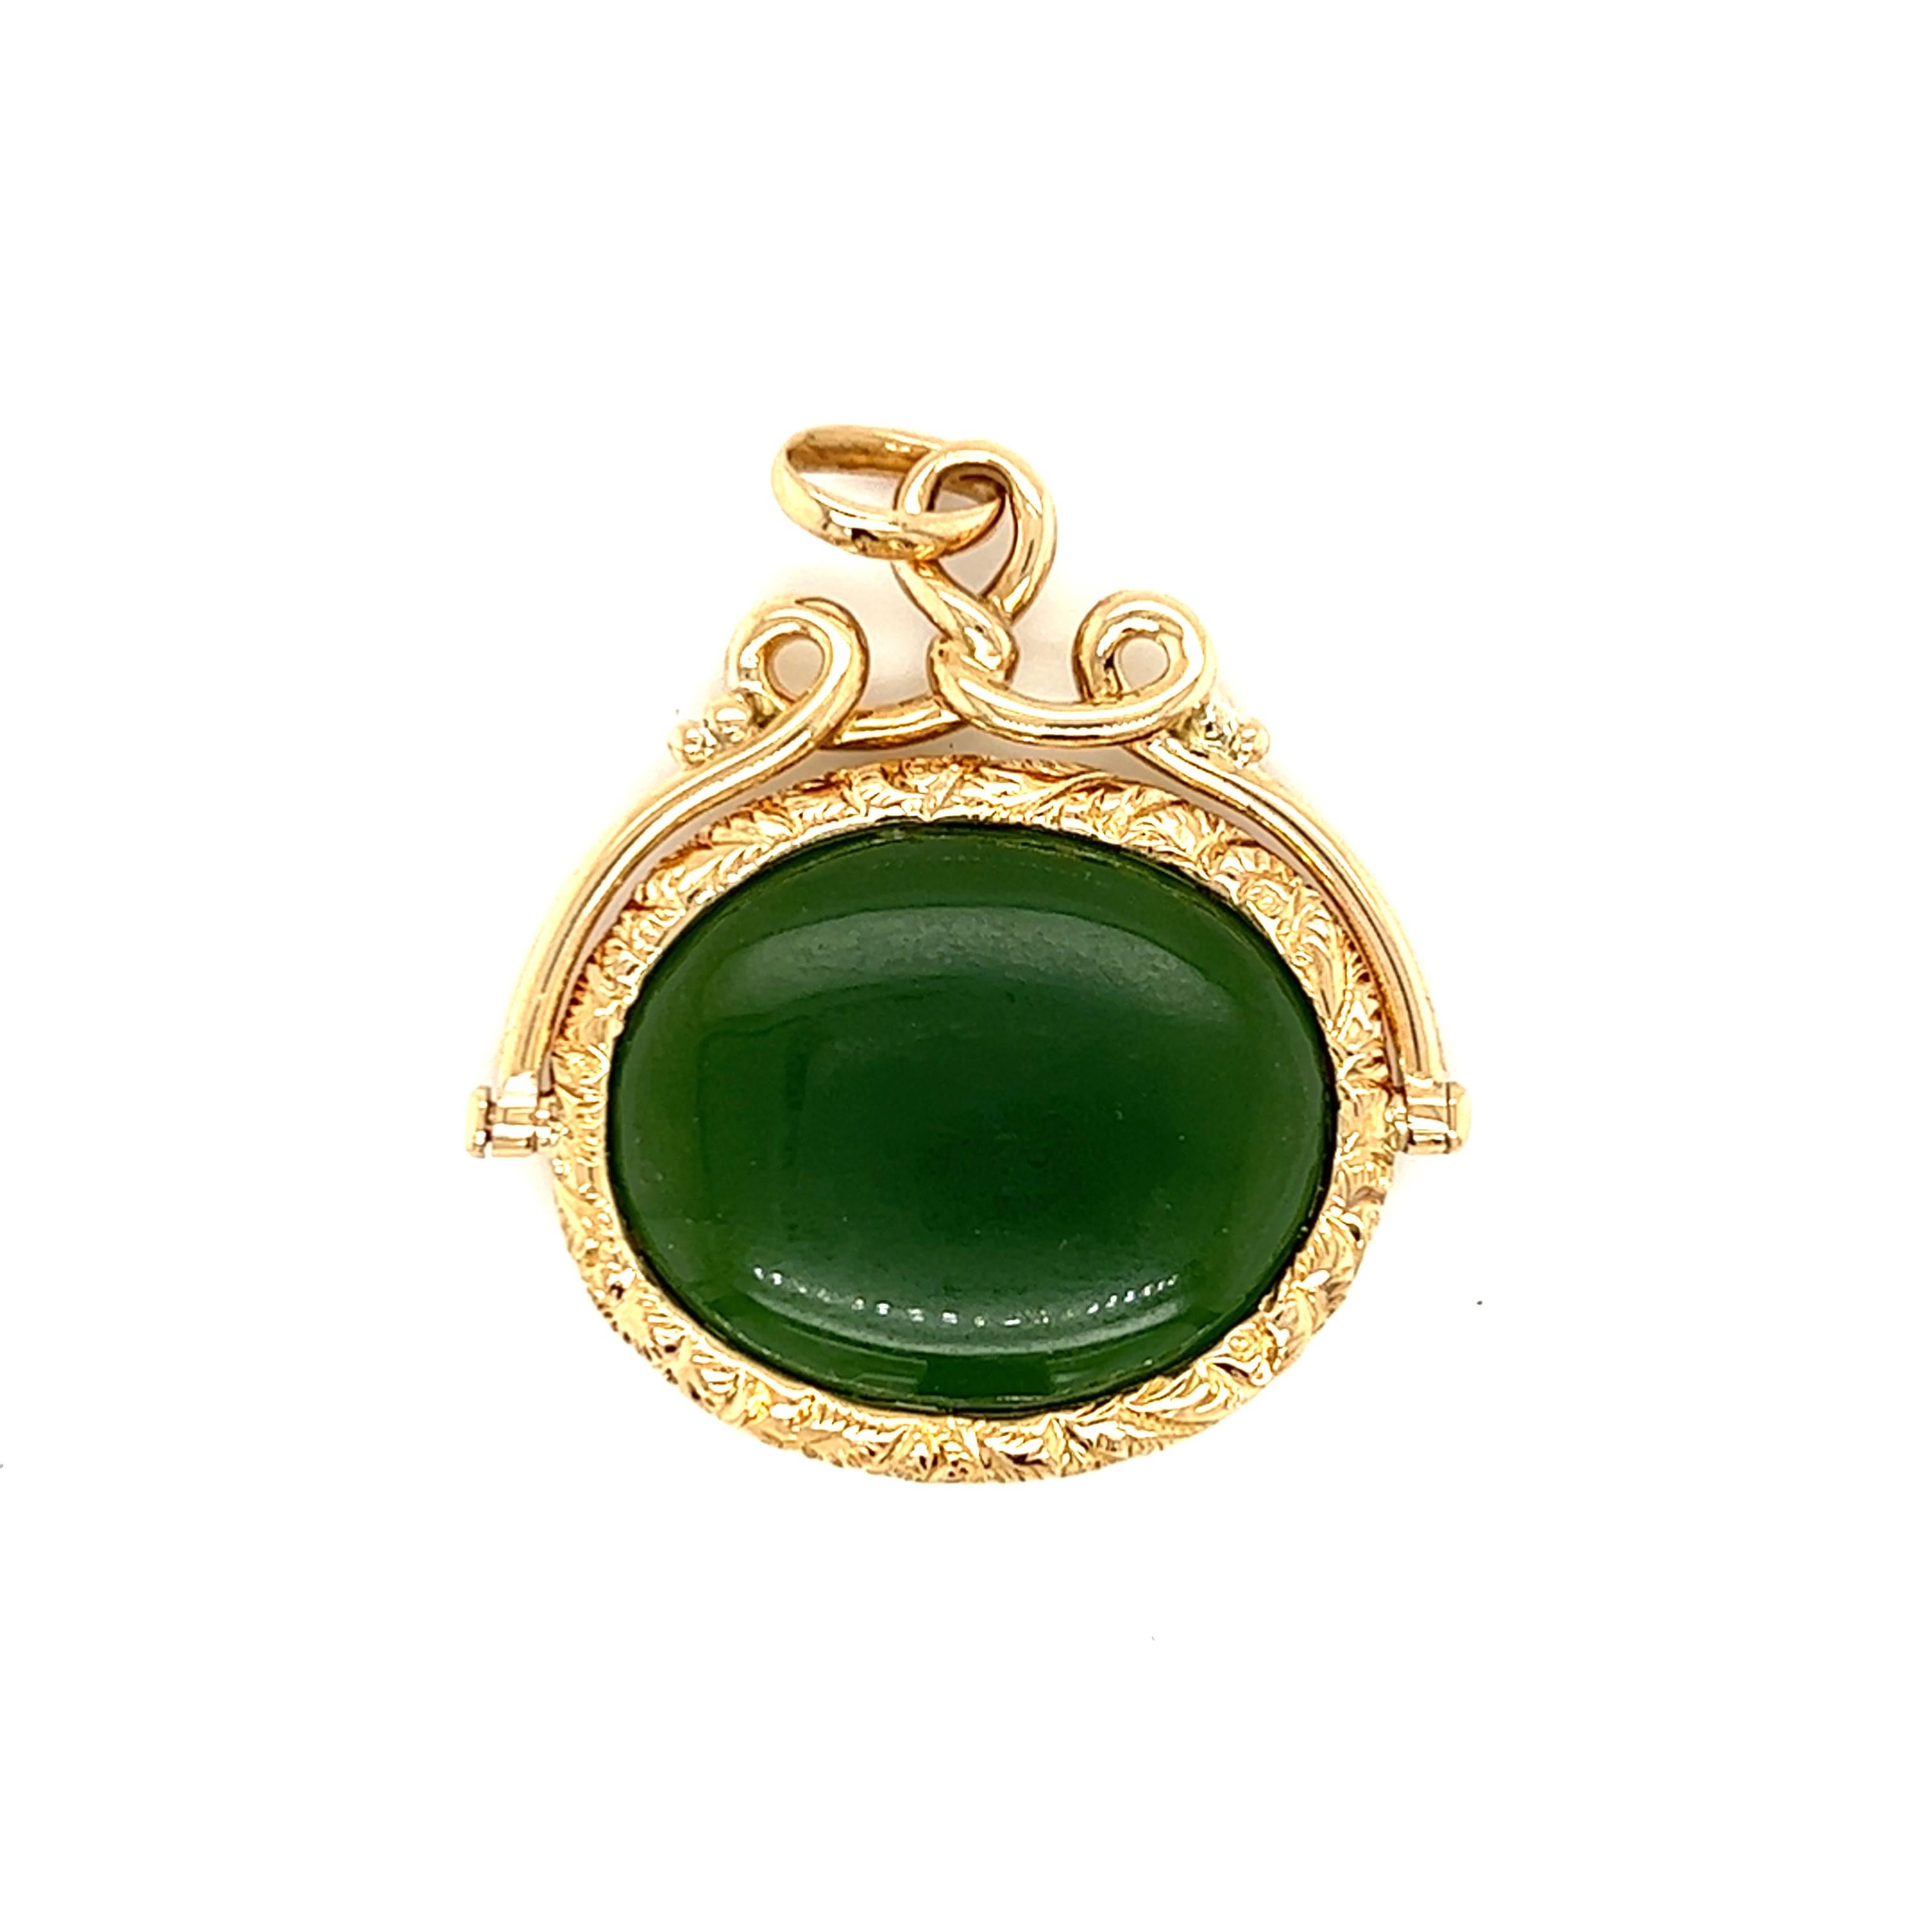 One early 20th-century oval jade intaglio watch fob pendant set in 14-karat solid rose gold. The pendant is stamped 14K with a hallmark. The pendant measures 1.5 inches long and 1.25 inches wide and weighs 7.9 grams. 


